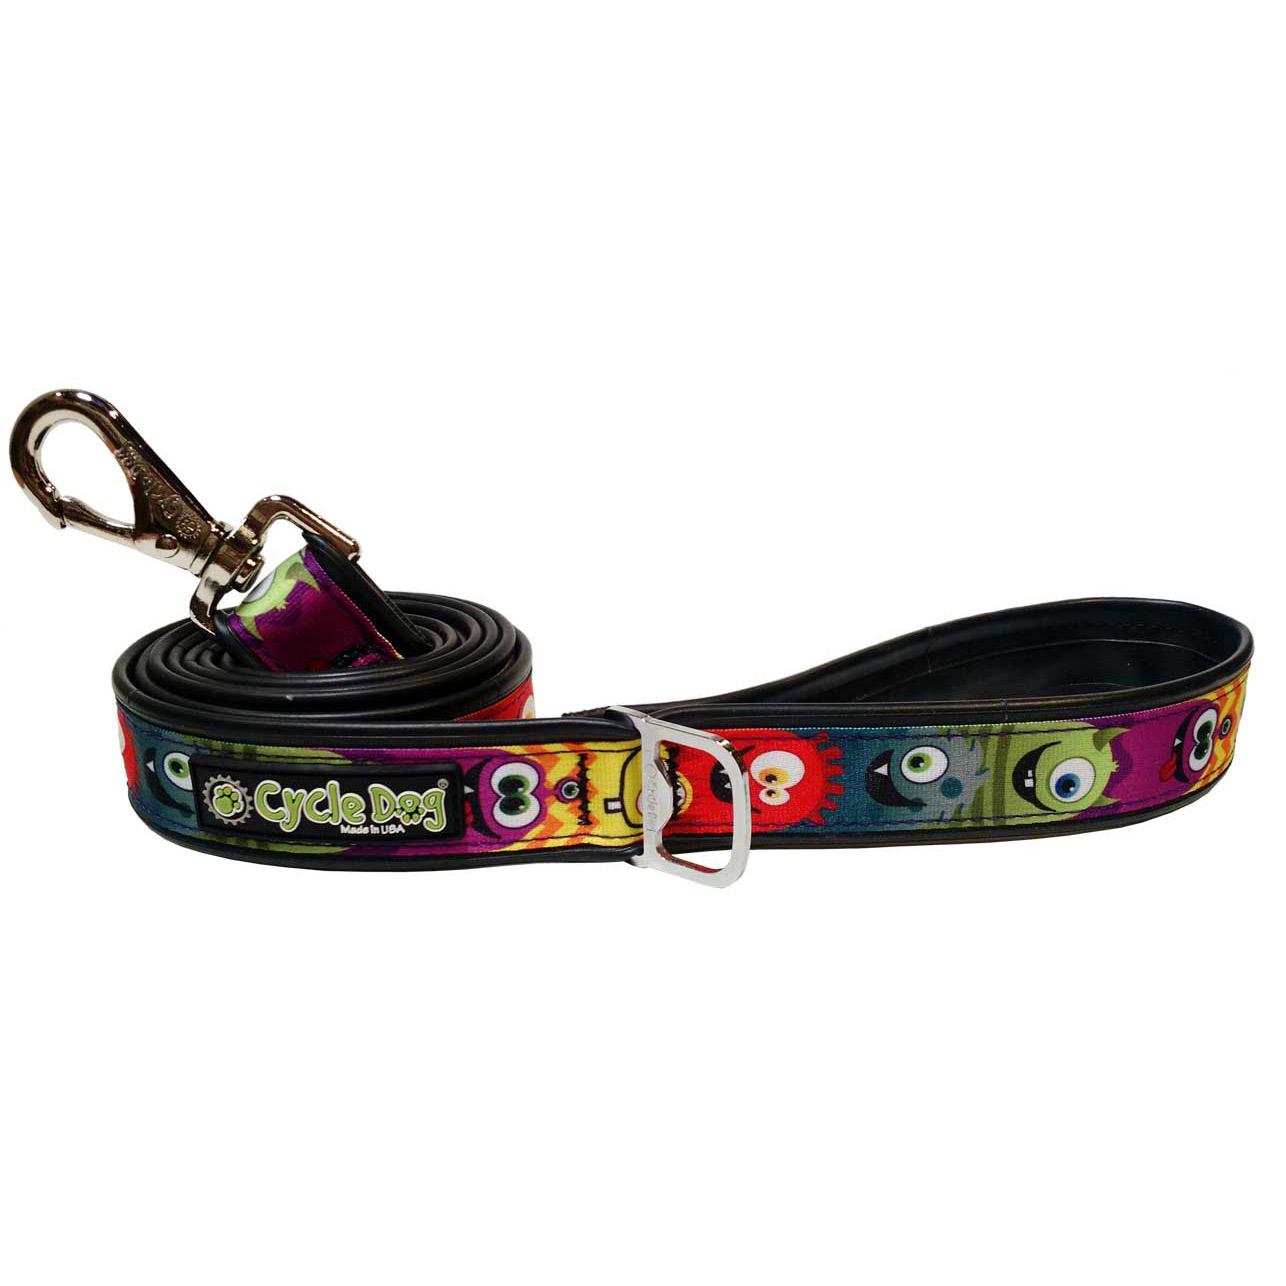 Cycle Dog Monsters Pup Top Dog Leash